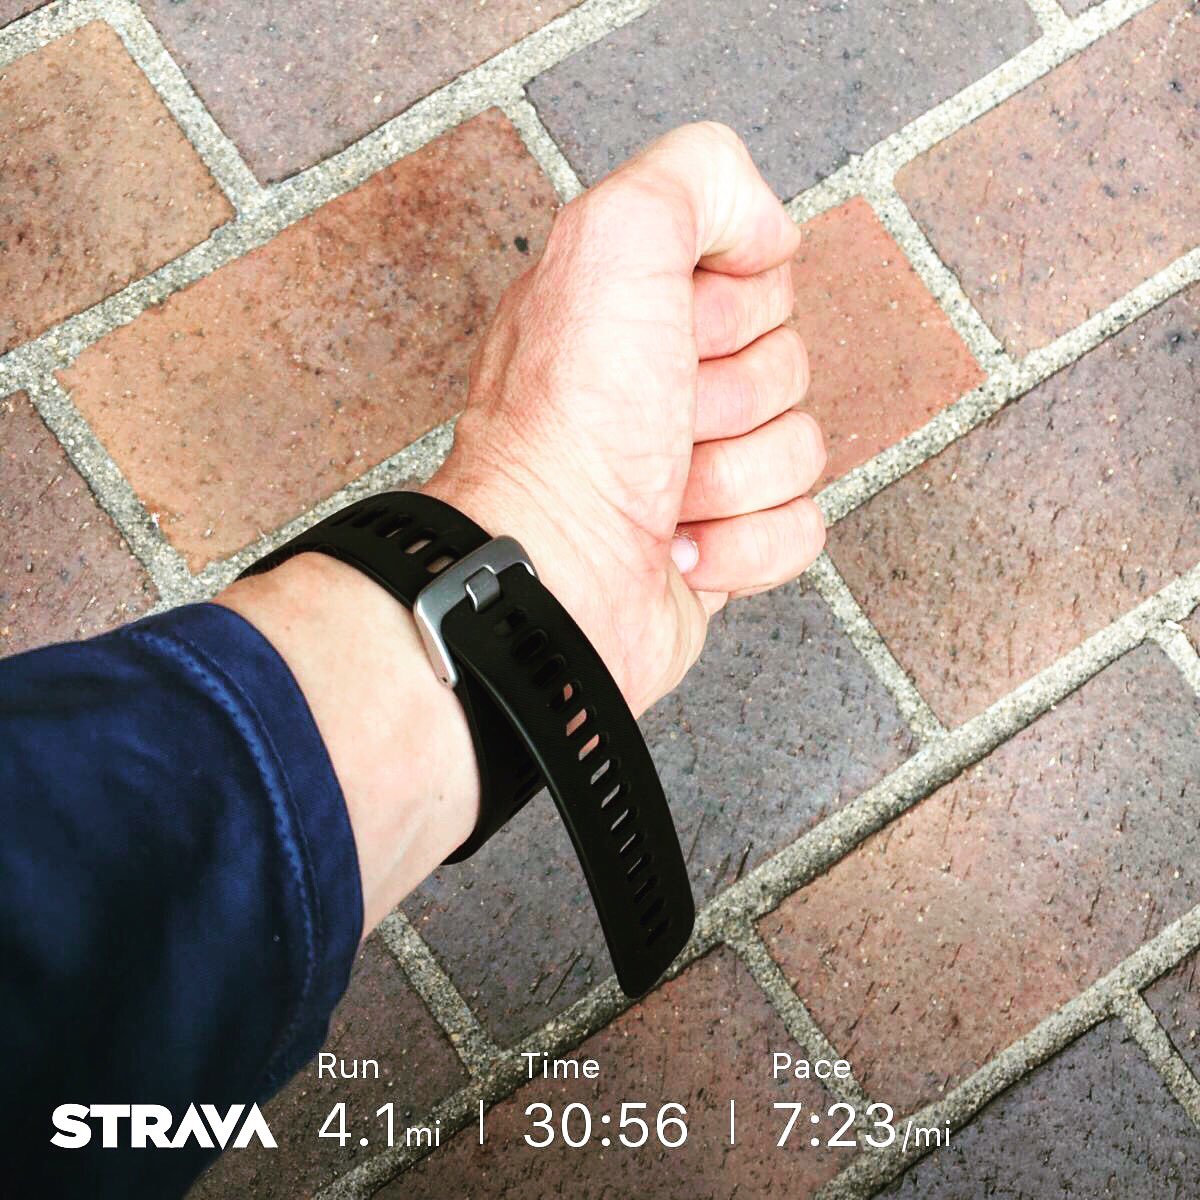 Worse than shin splint? Side stitch? Stress fracture? When your watch’s “keeper” breaks. Third #garmin to do this - All under a year each. Planned obsolescence? You might be giving the designers too much credit🤨

#garminwatch #garminforerunner #strava #gpswatch #running #rei